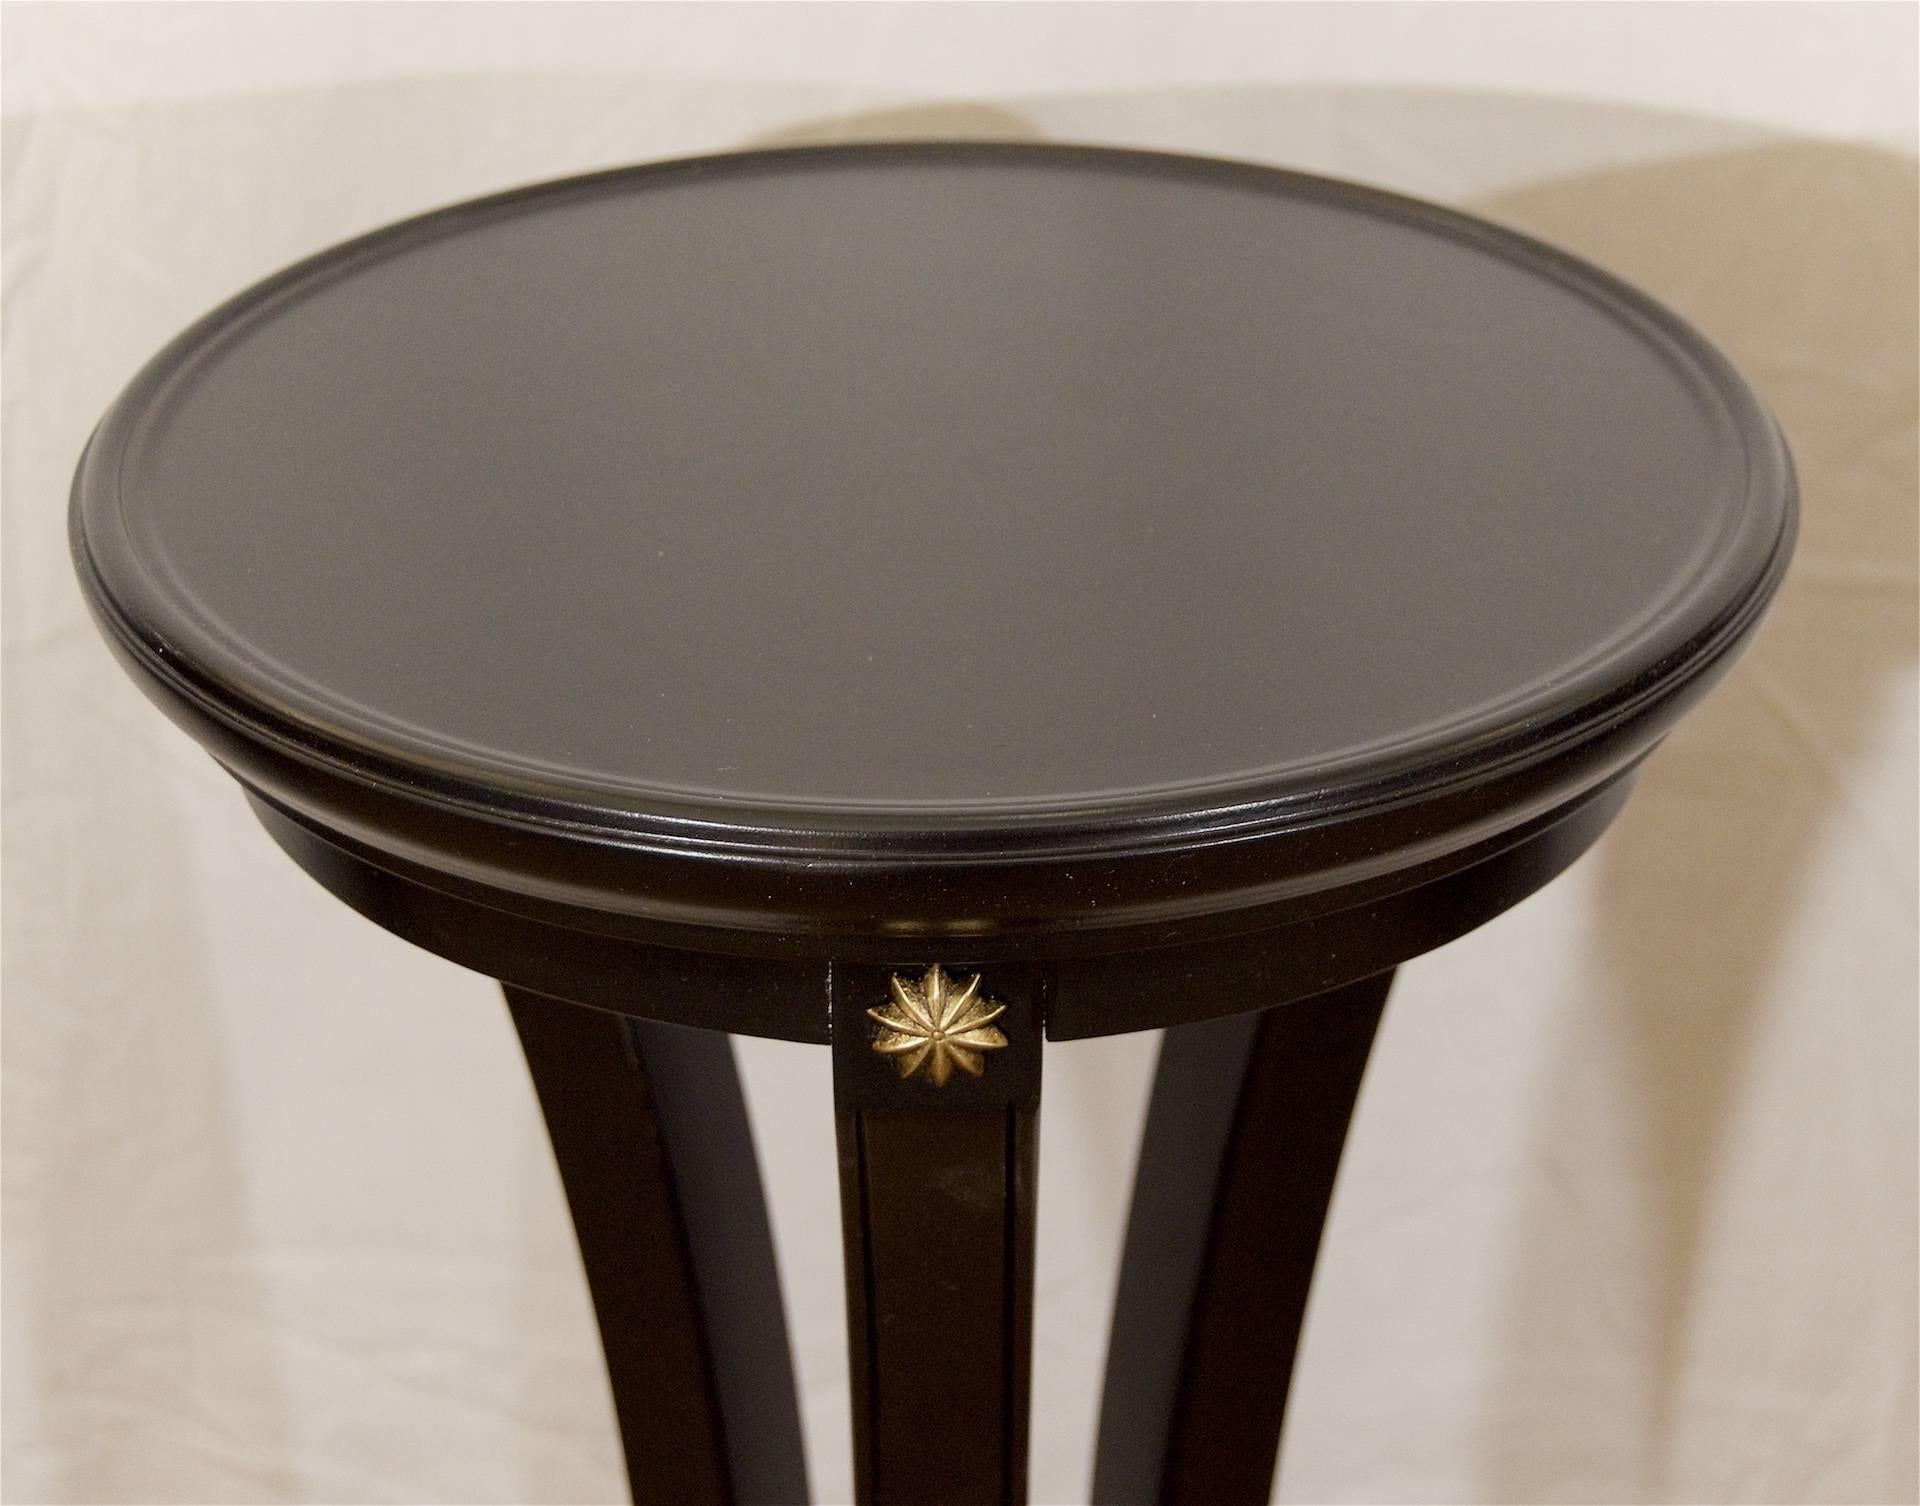 Pair of Black Lacquer and Gilt Pedestals In Excellent Condition For Sale In Stamford, CT